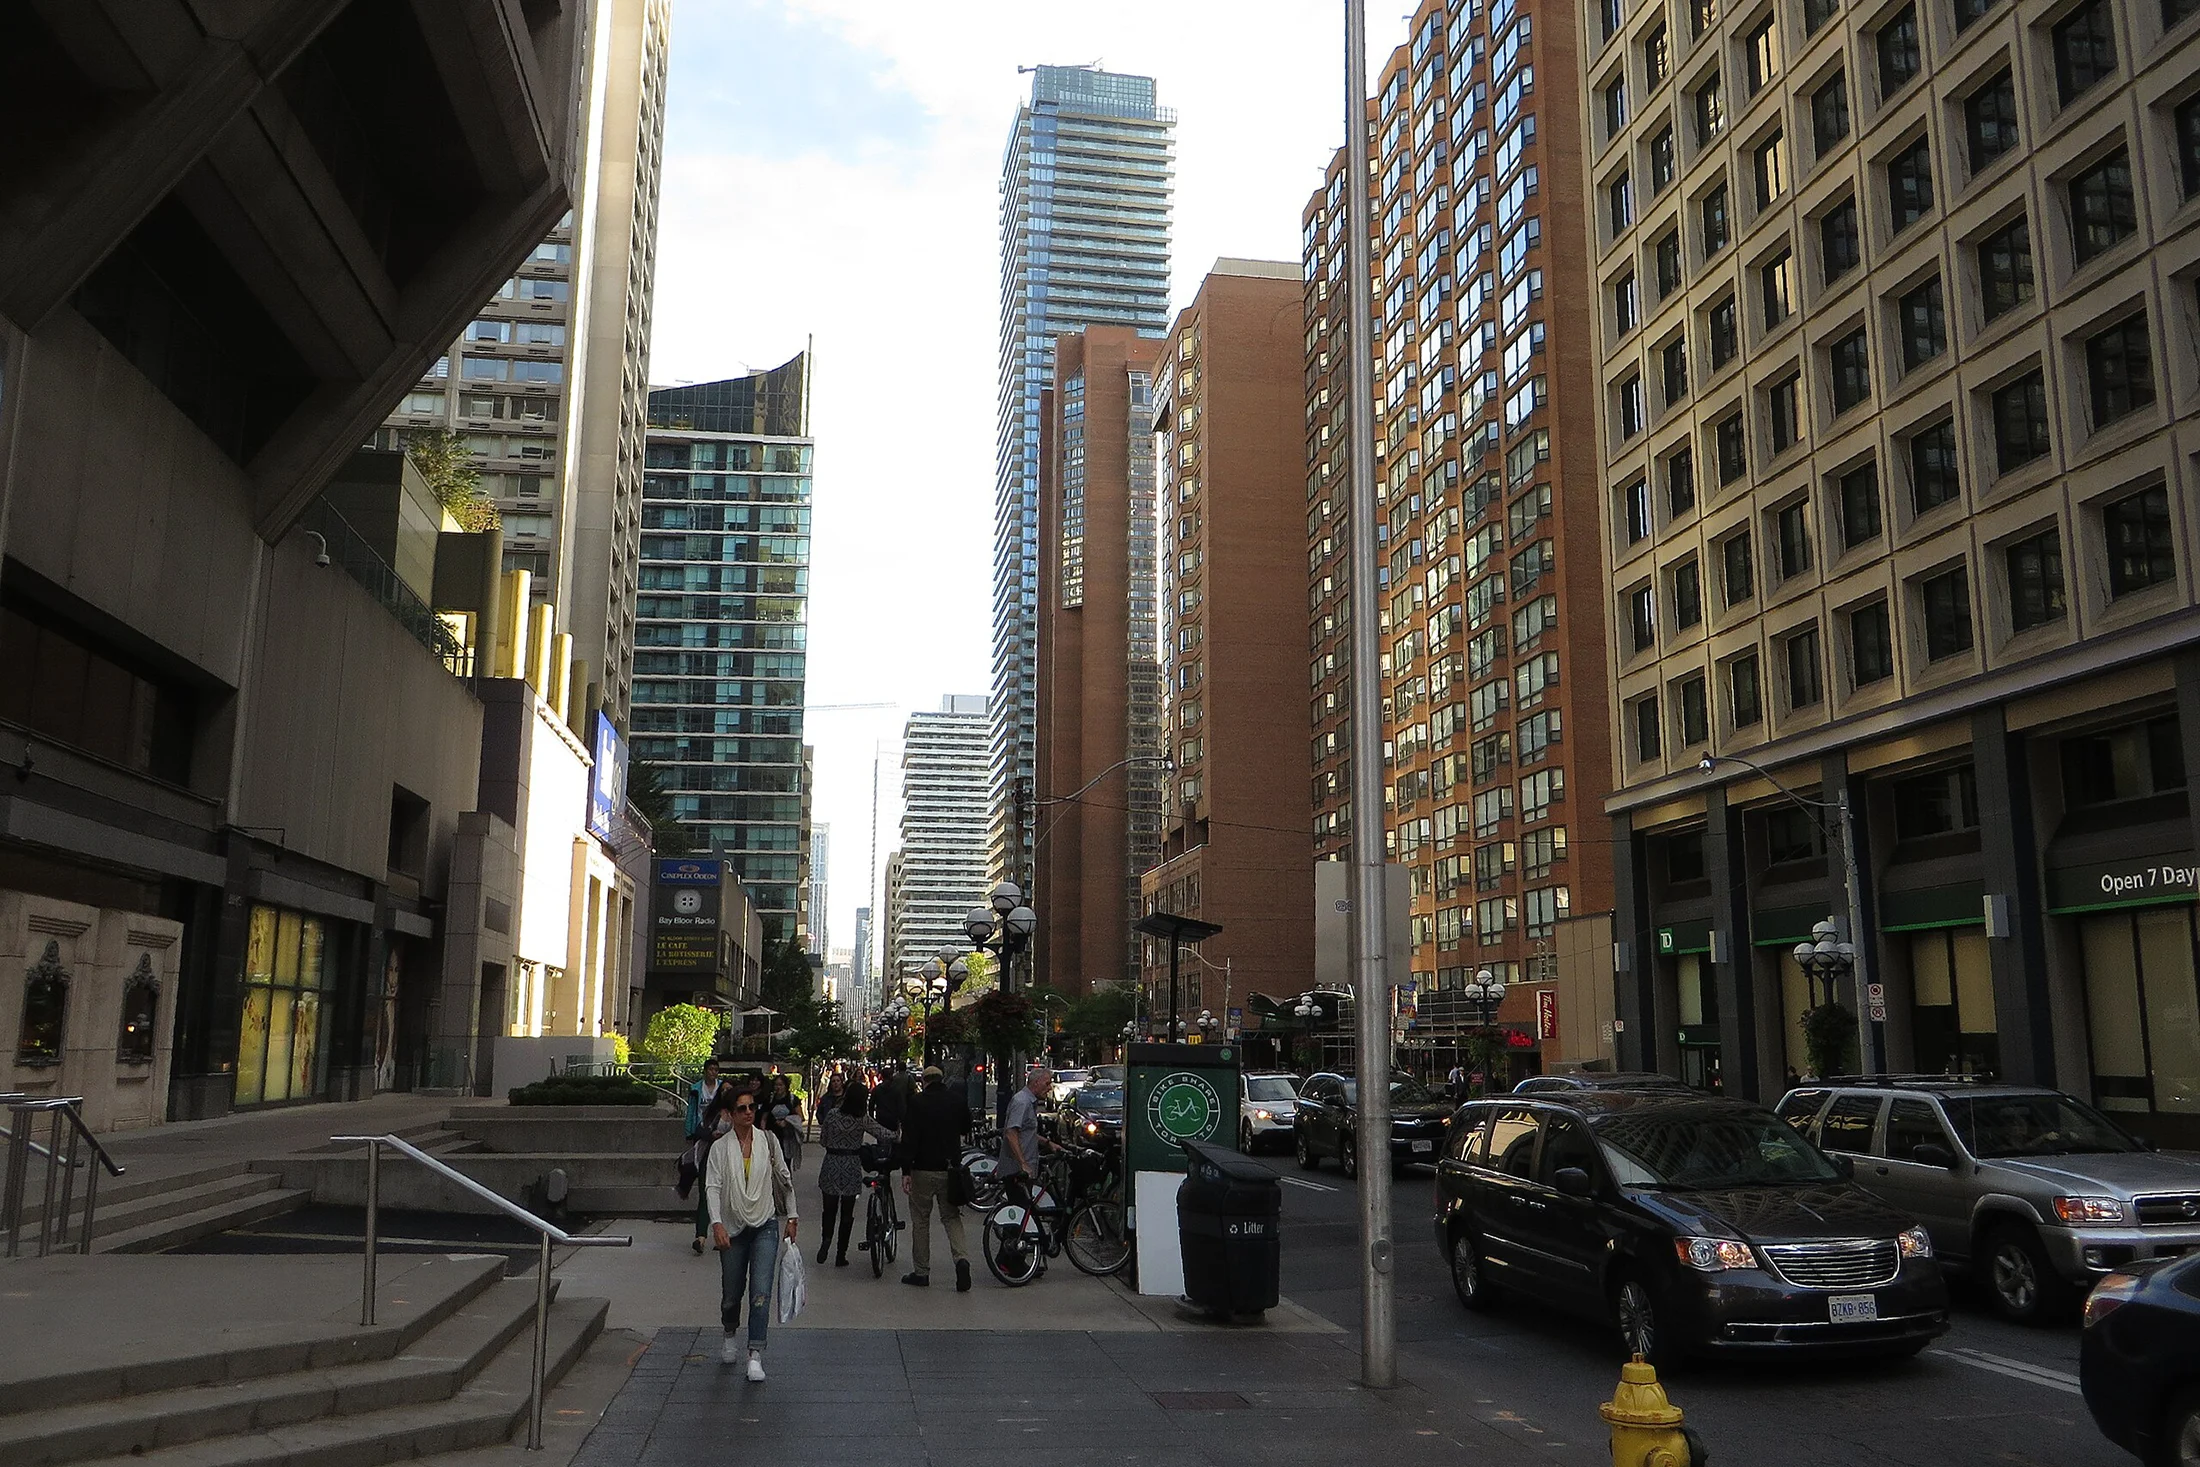 Shadows created by tall buildings on Bloor Street's "Mink Mile"